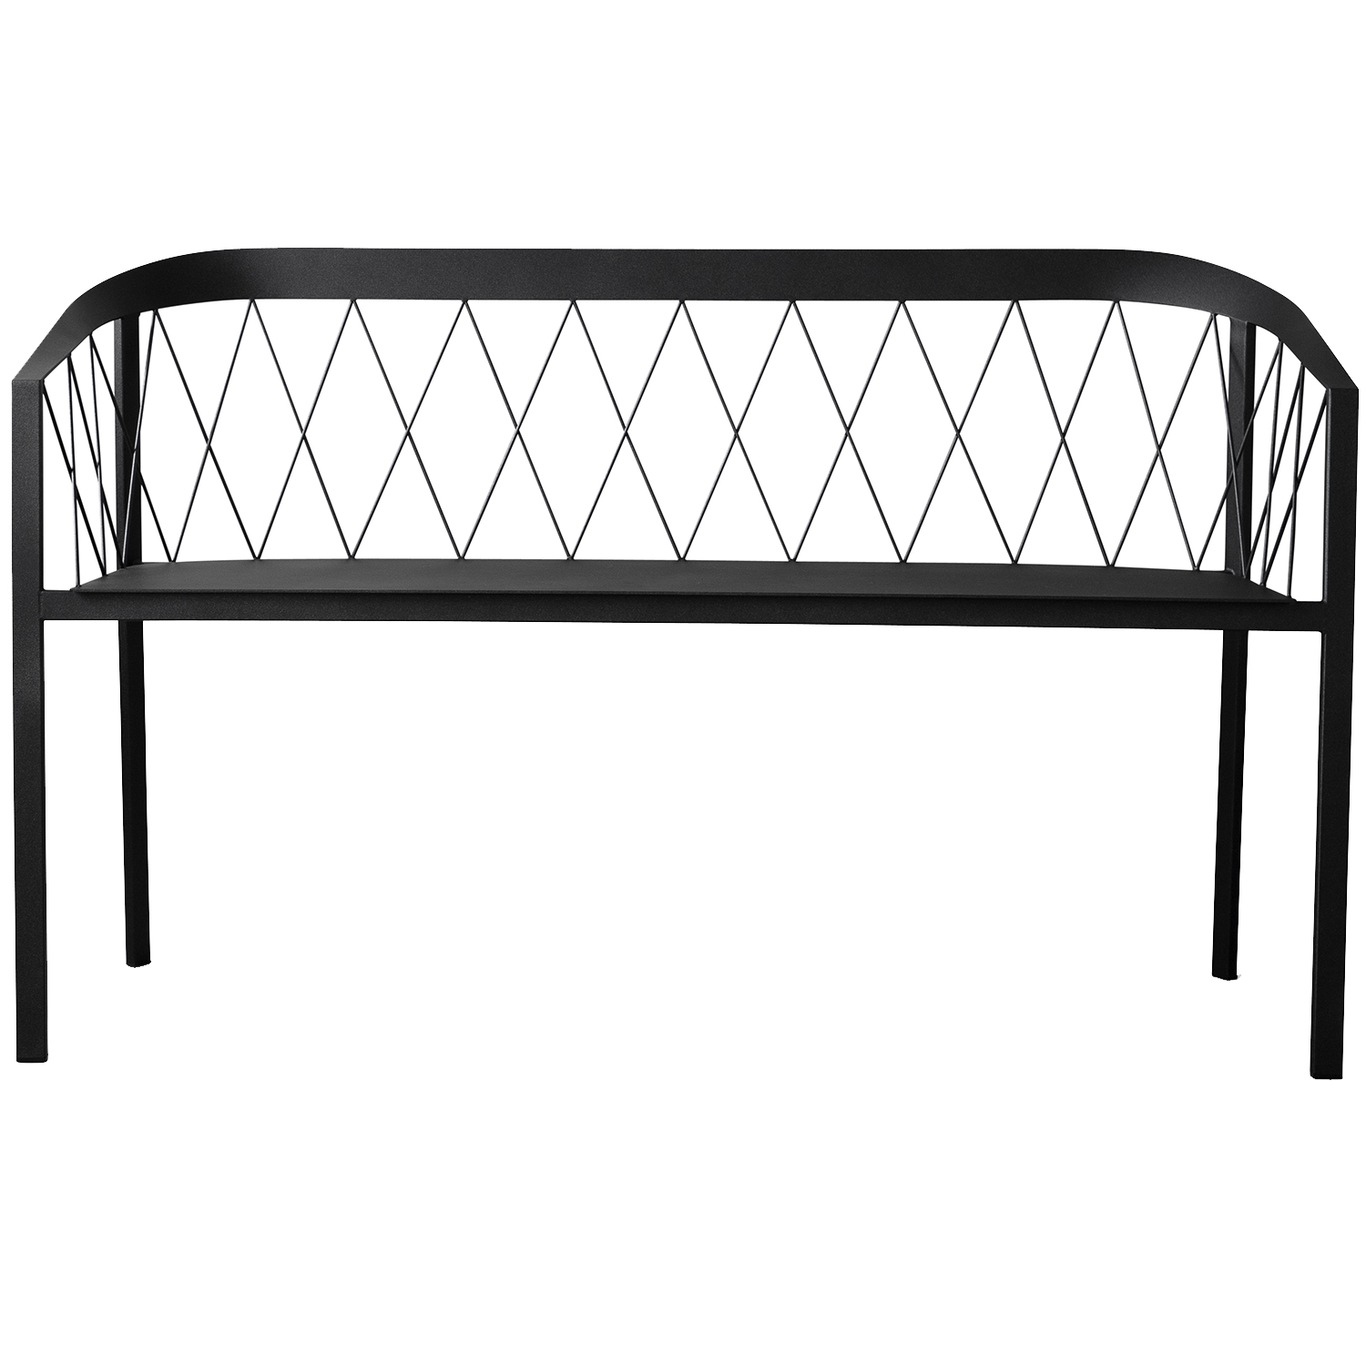 Our Bench, Black